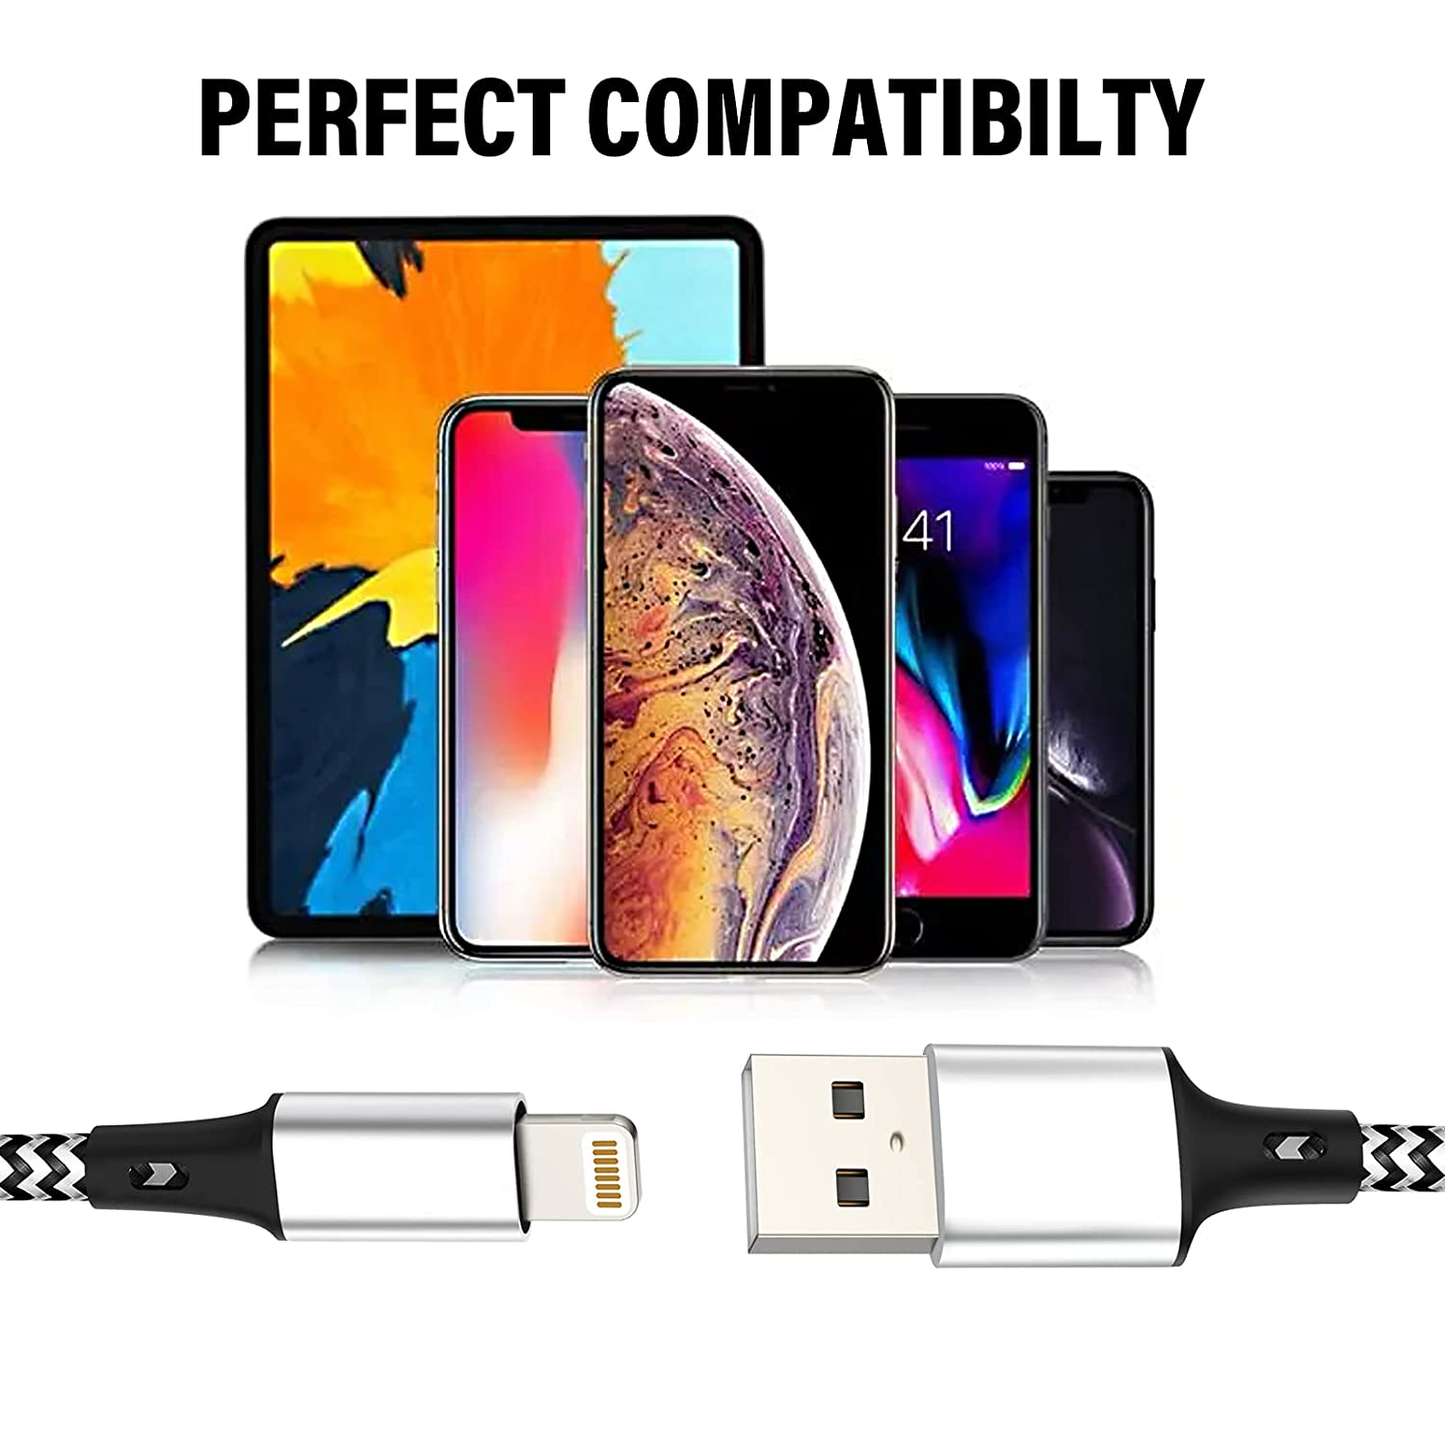 Mfi Certified Iphone Charger Cable 3Pack[3/3/6Ft] Fast Charging Lightning Cable Compatible Iphone 12/11Pro Max/11Pro/11/Xs/Max/Xr/X/8/8P/7And More-Black&White